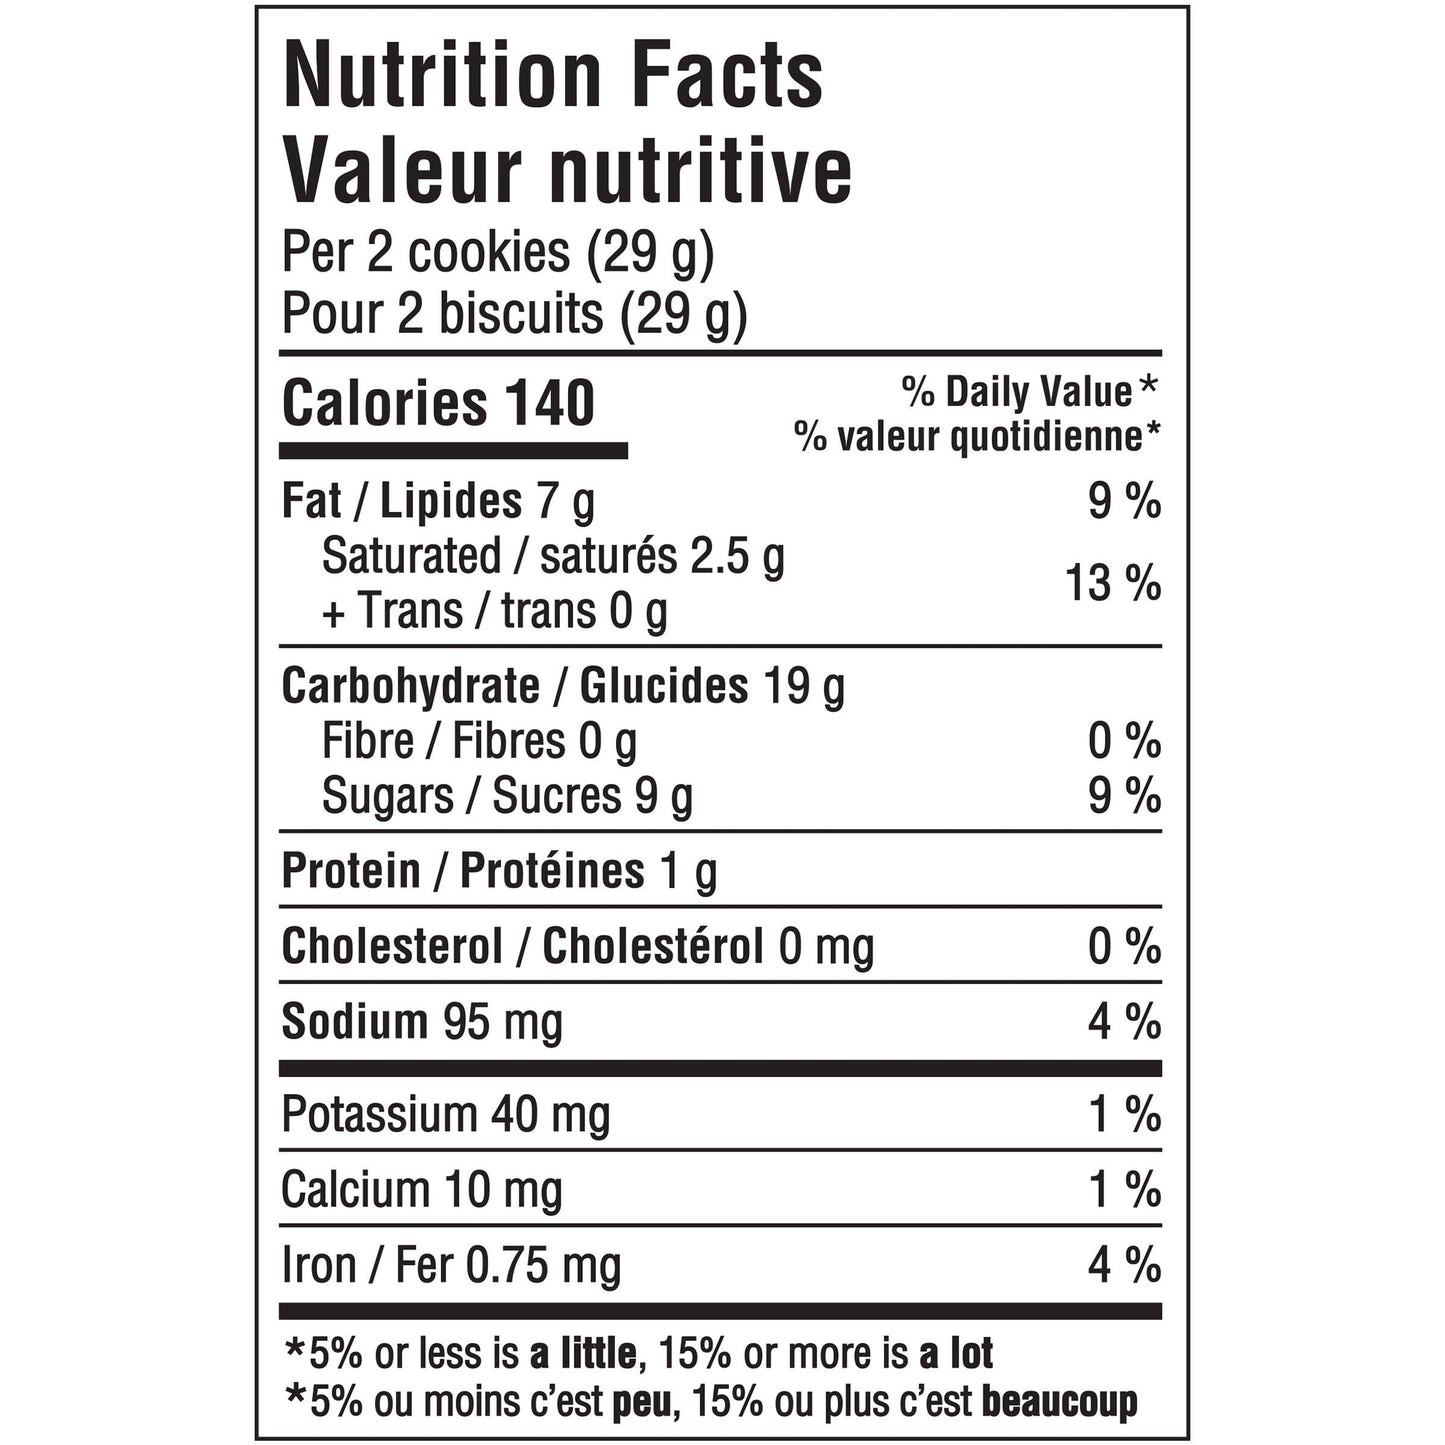 Christie Chips Ahoy Cadbury Mini Eggs Chocolate Chip Cookies 460g/16.2oz (Shipped from Canada)